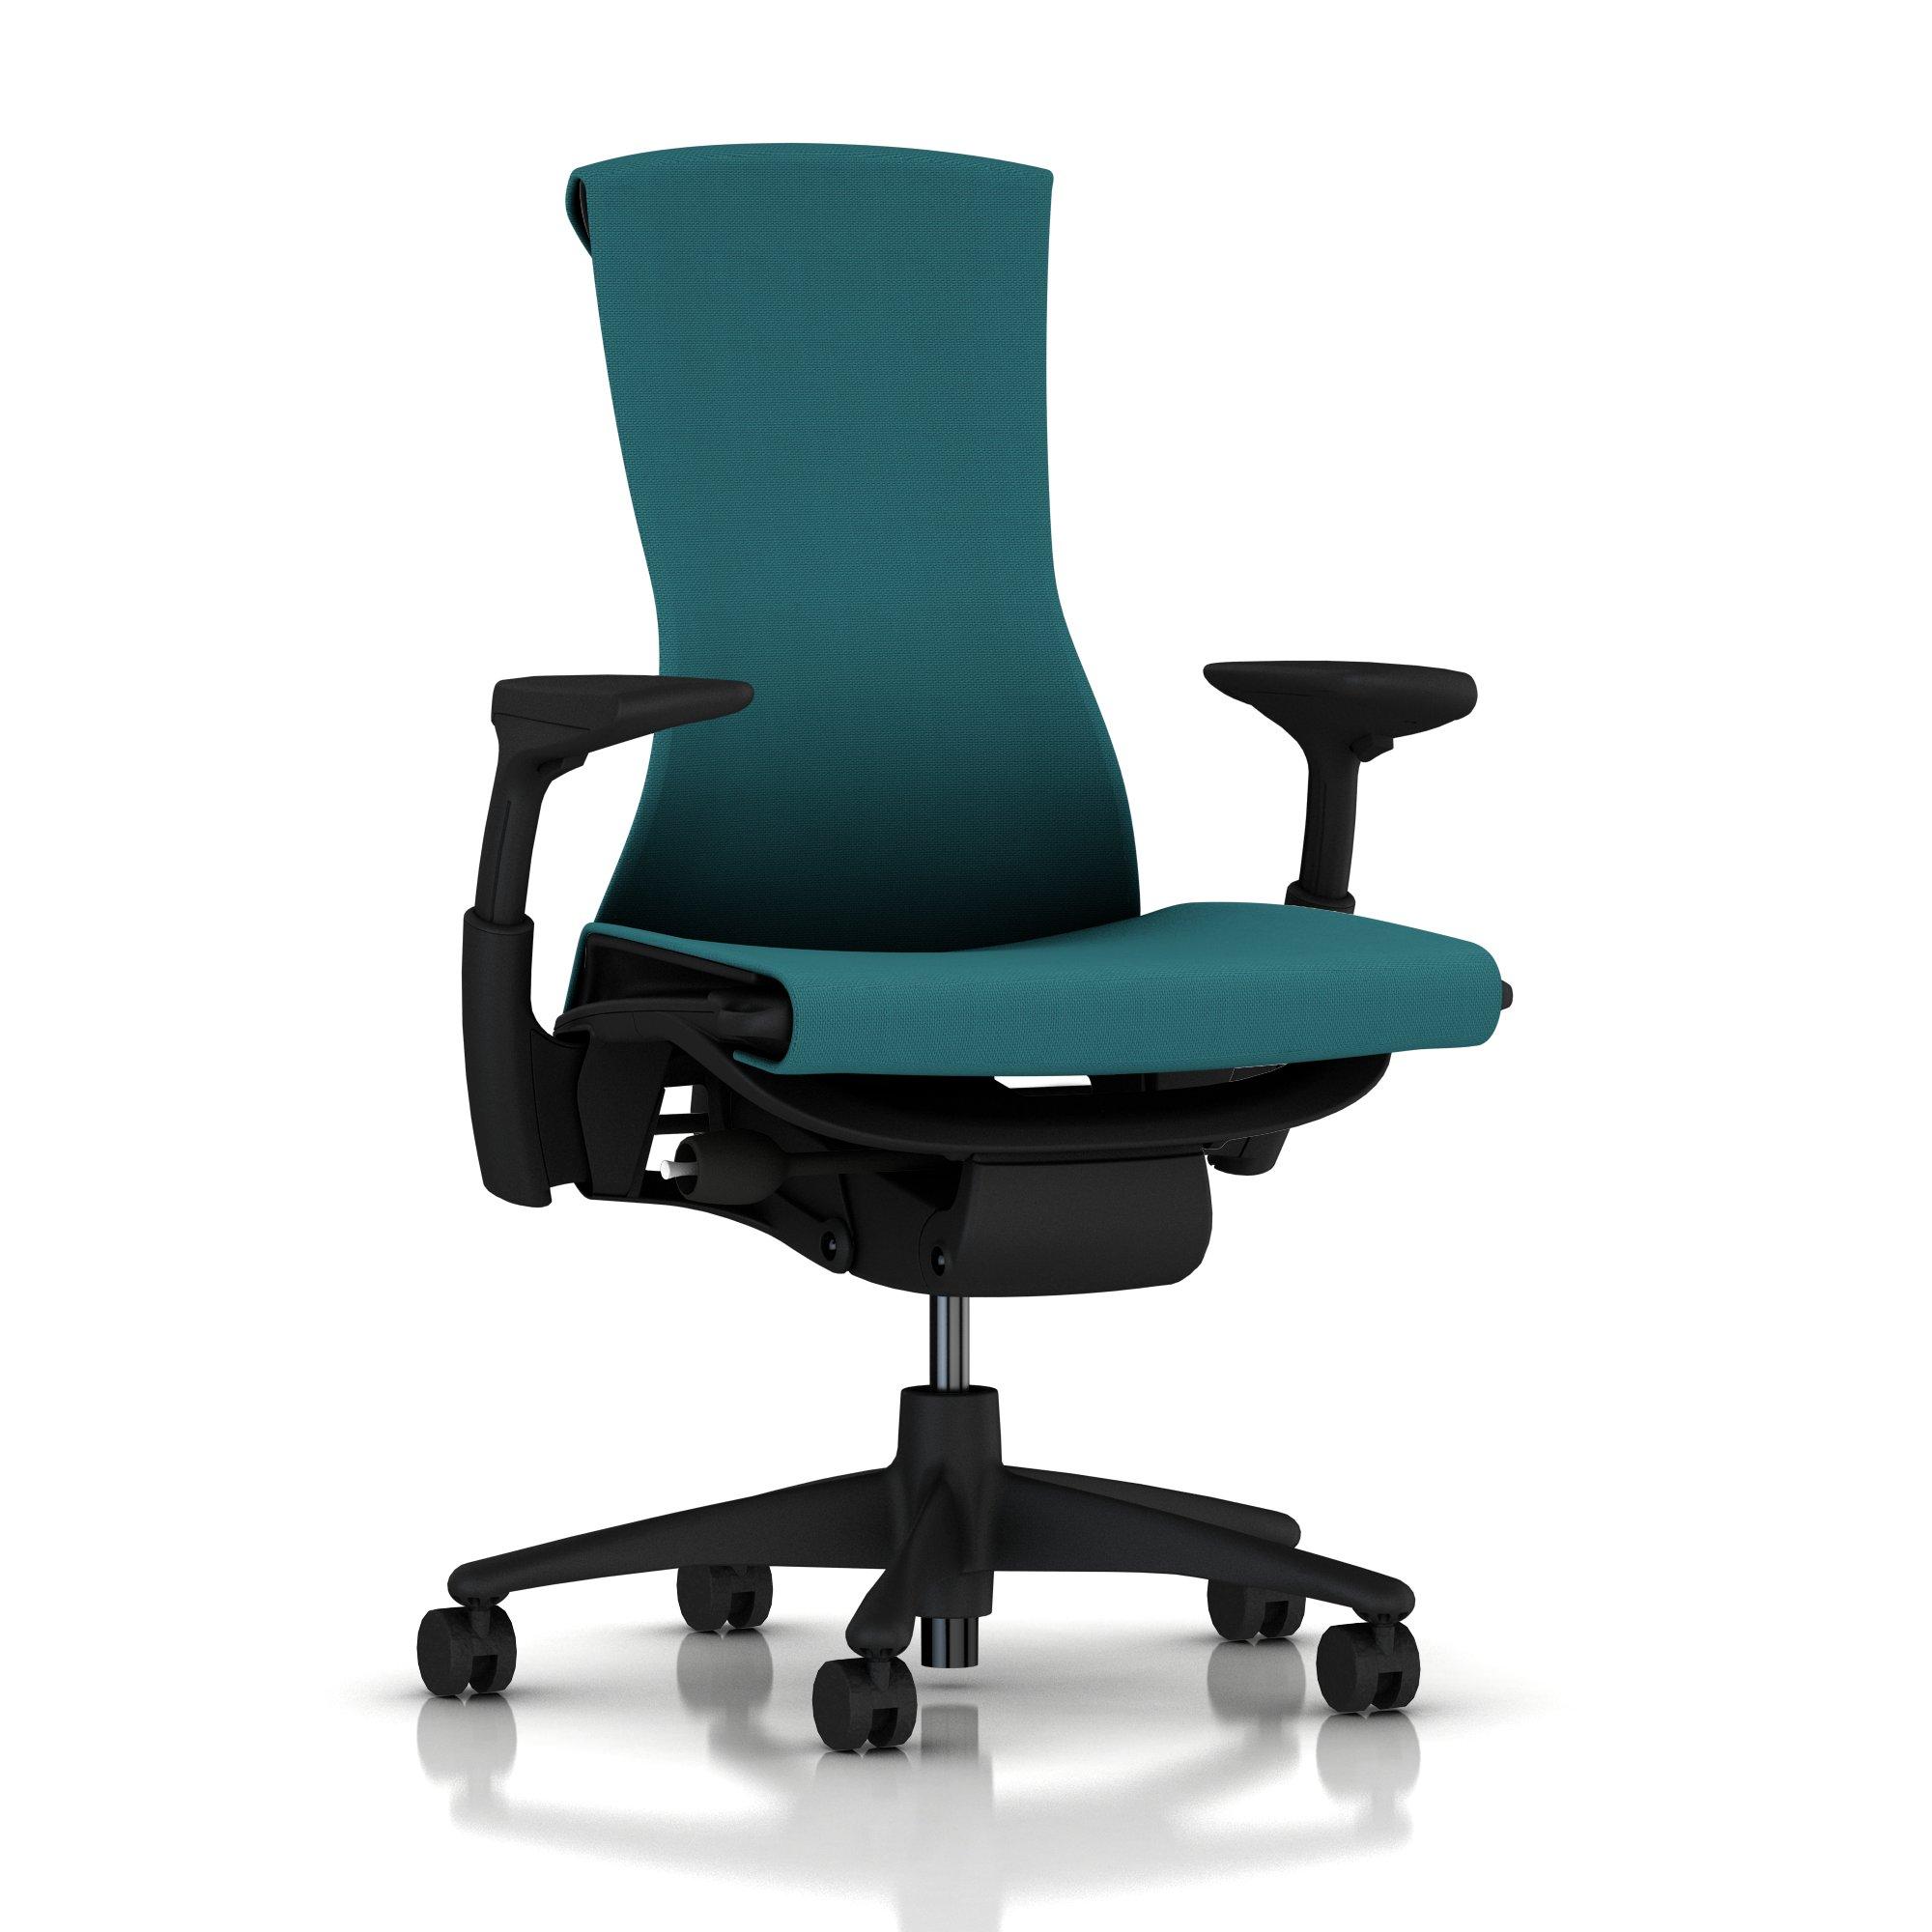 Embody Chair Peacock Rhythm with Graphite Frame